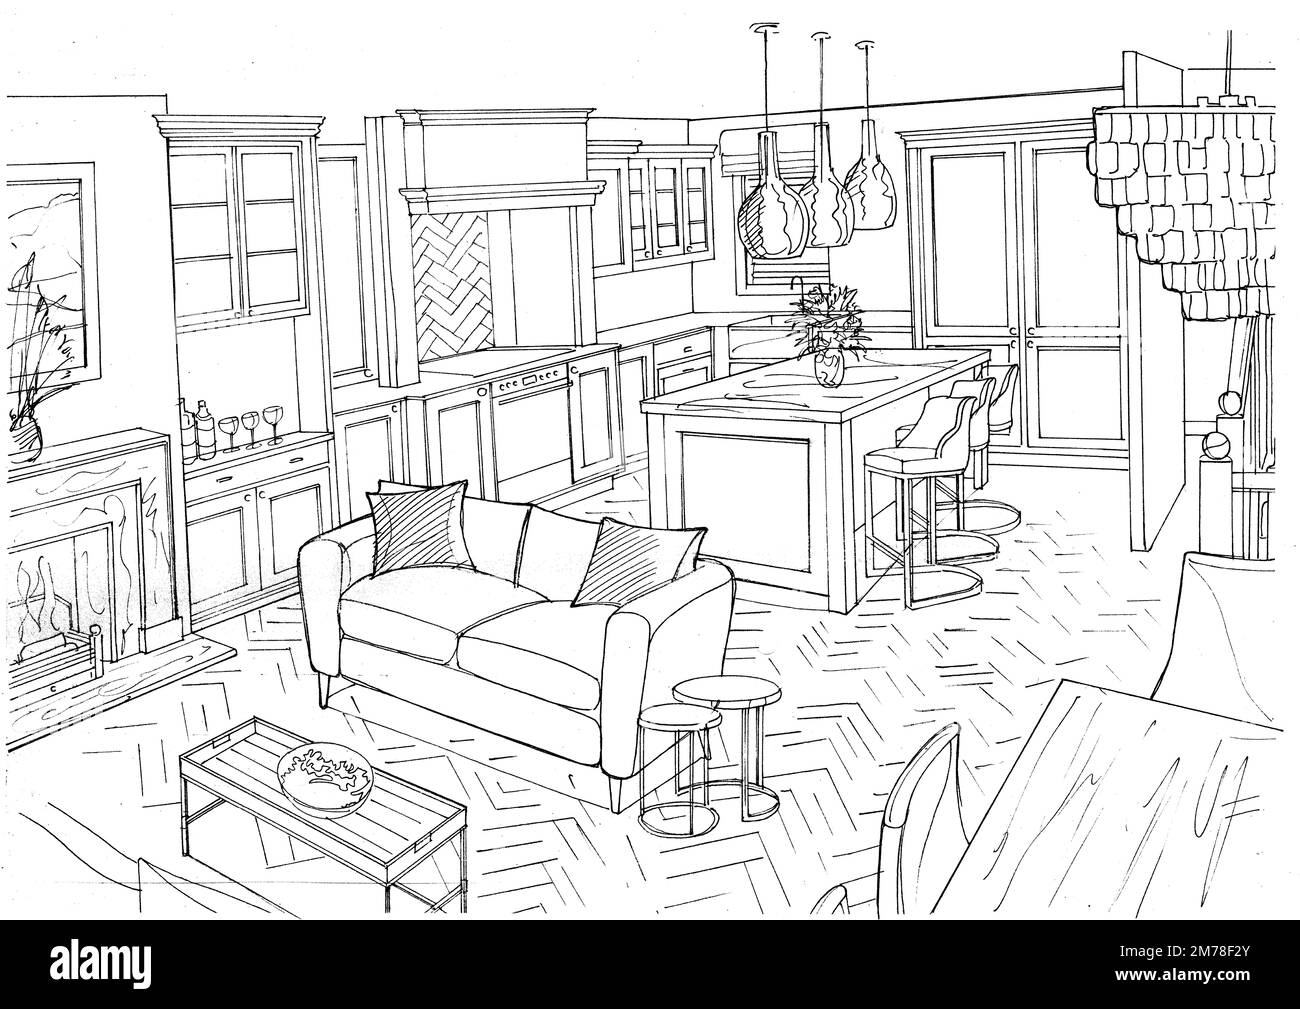 Black and white sketch of a lounge and kitchen interior on a white background. Stock Photo